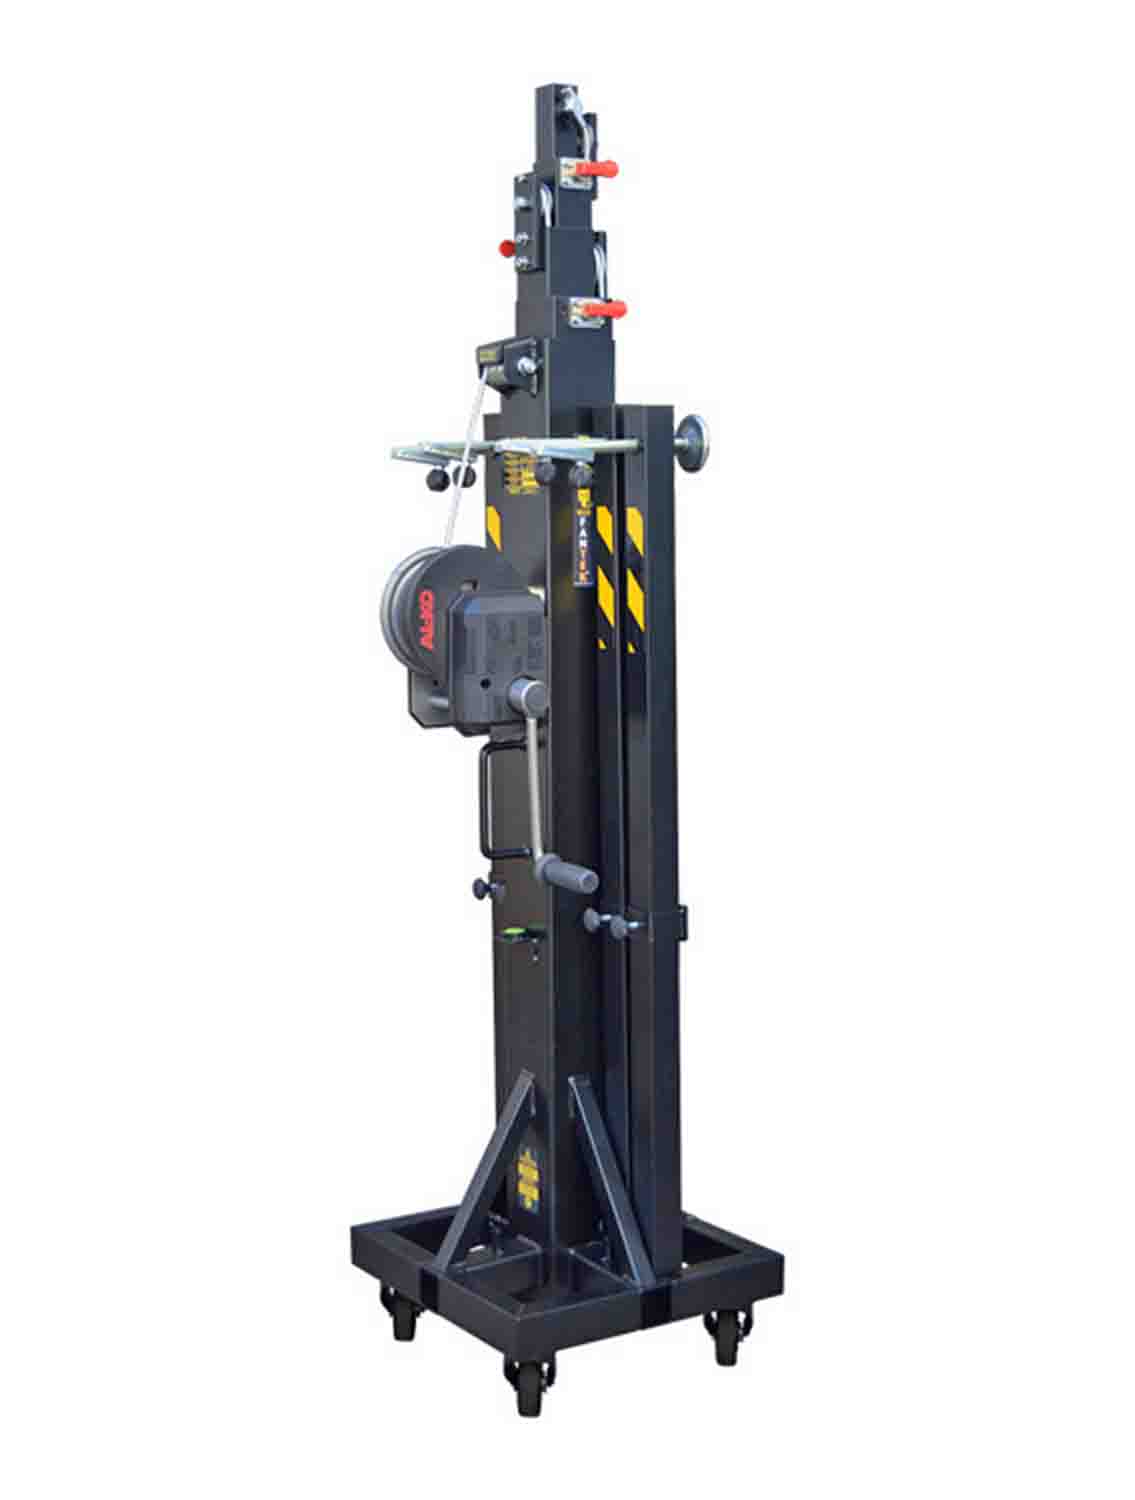 ProX XTF-T106D, Top Loading Lifting Tower - Capacity 496 lbs - Hollywood DJ